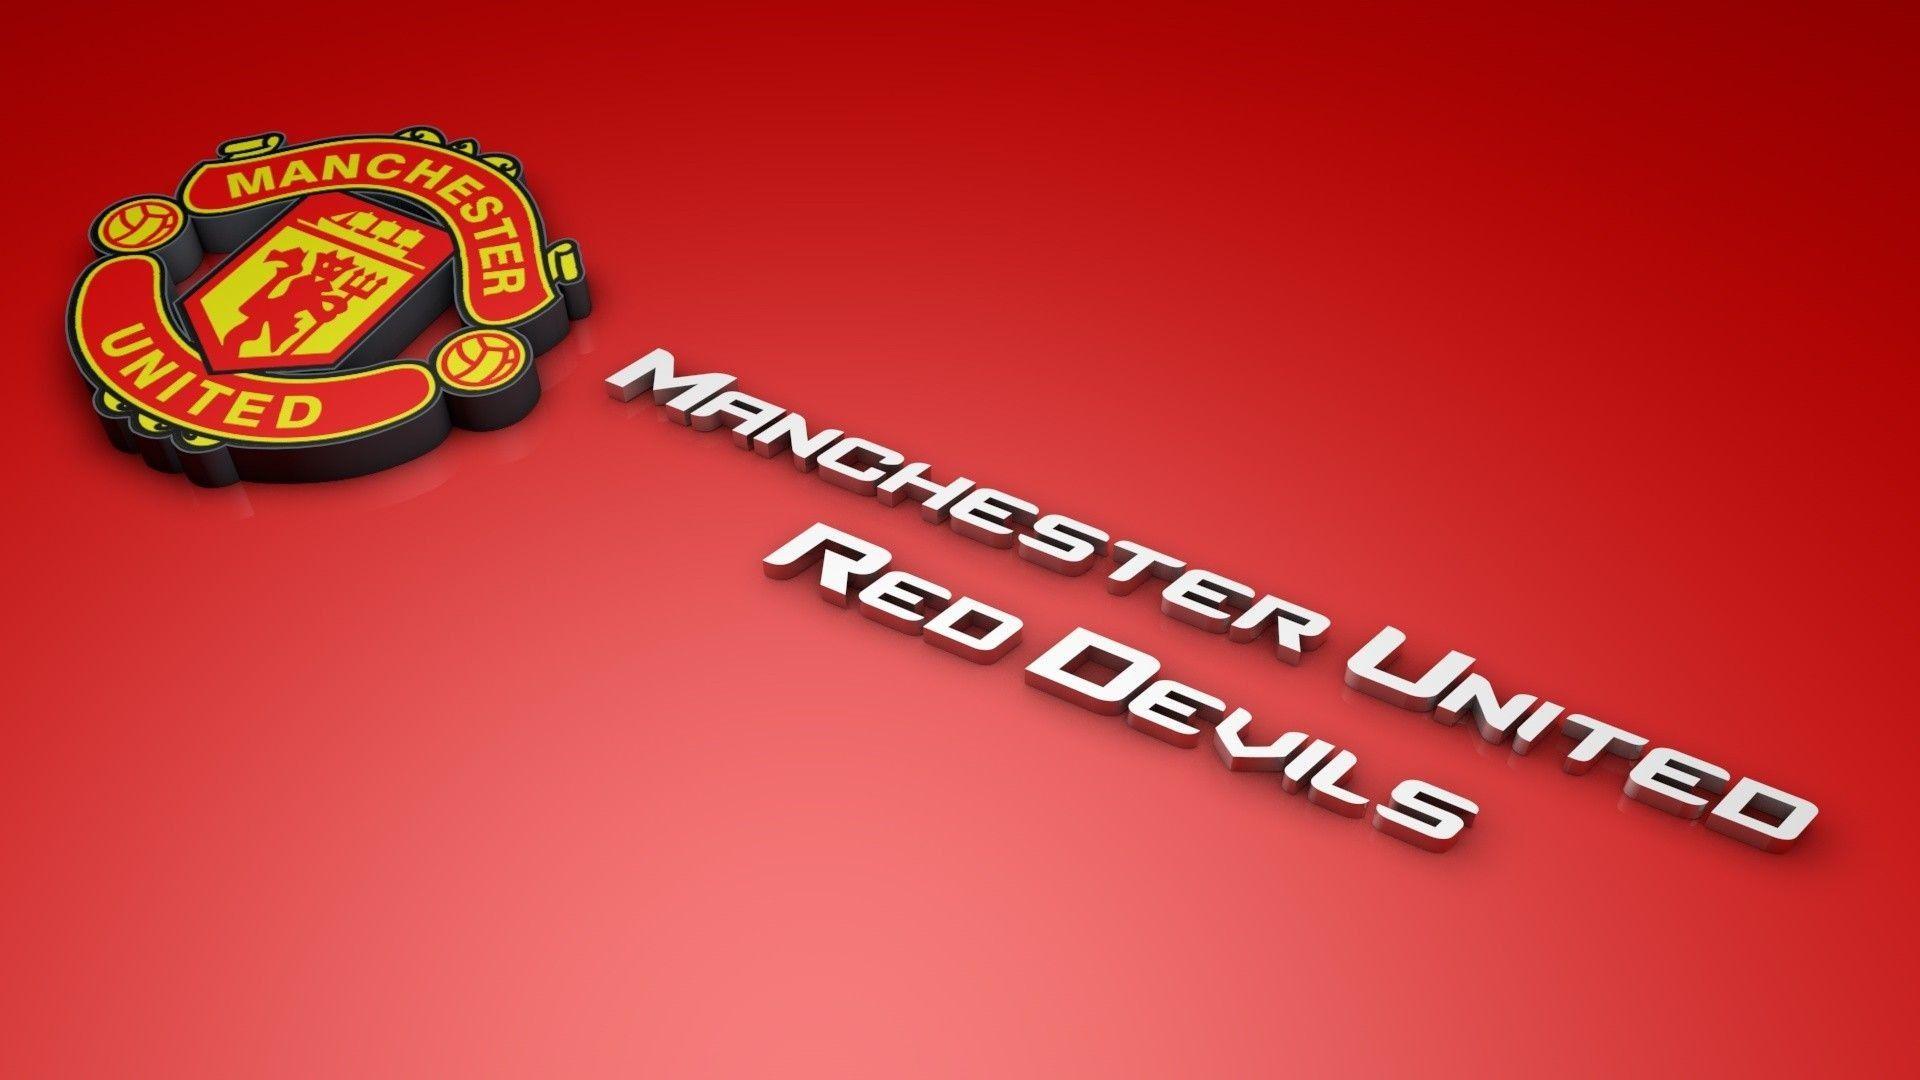 Manchester United Logo Wallpapers HD 2017 63+